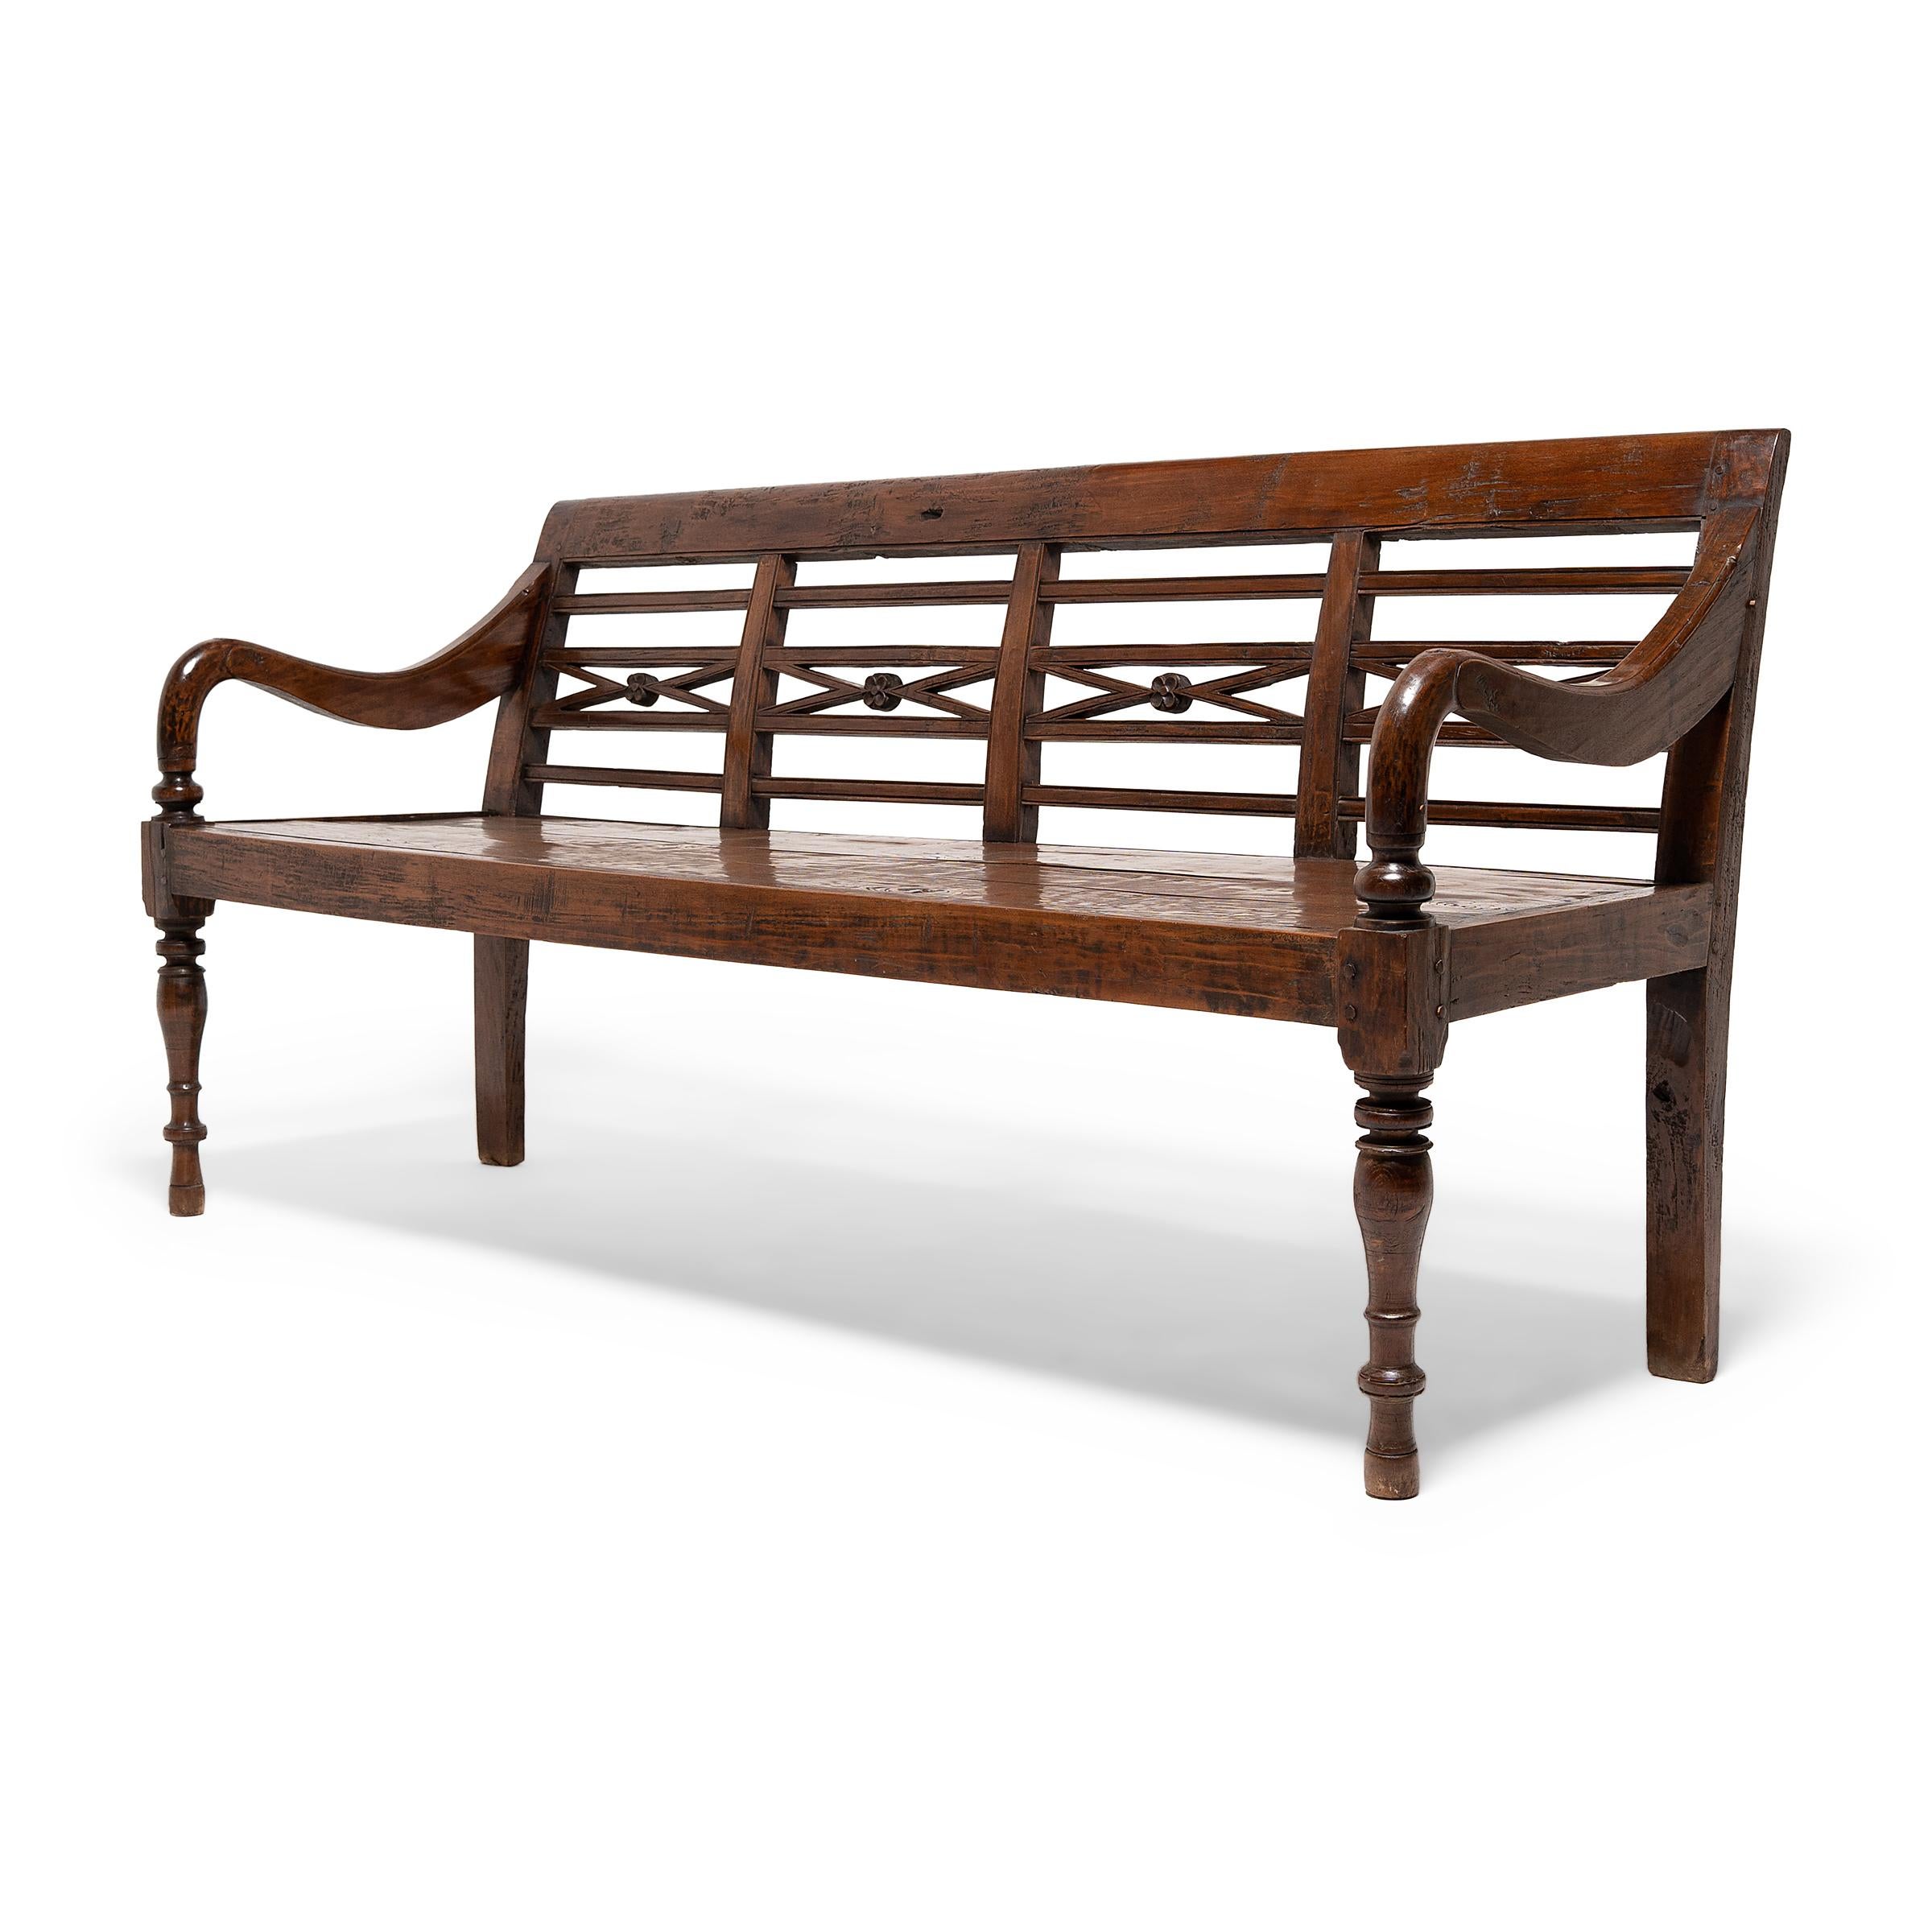 This charming Dutch Colonial garden bench comfortably seats three and makes the perfect addition to a sunroom, patio, or entryway. Crafted in Indonesia in the late-19th century. The bench features a solid wood seat, turned post front legs, and